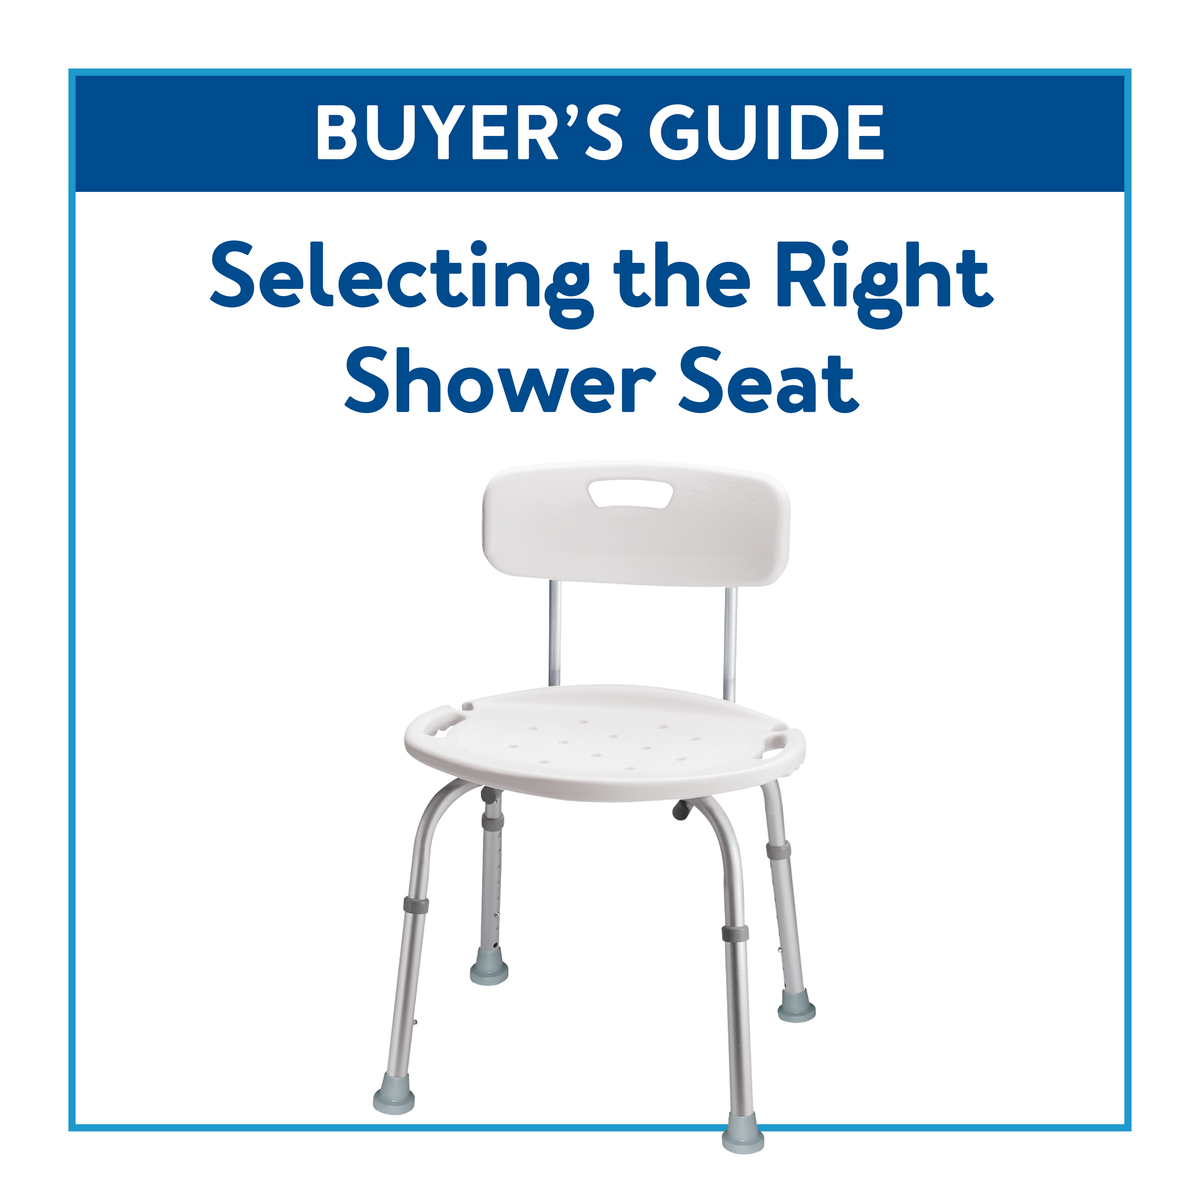 A buyer’s guide cover image with a shower seat. Text, Buyer’s Guide: Selecting the Best Shower Seat.